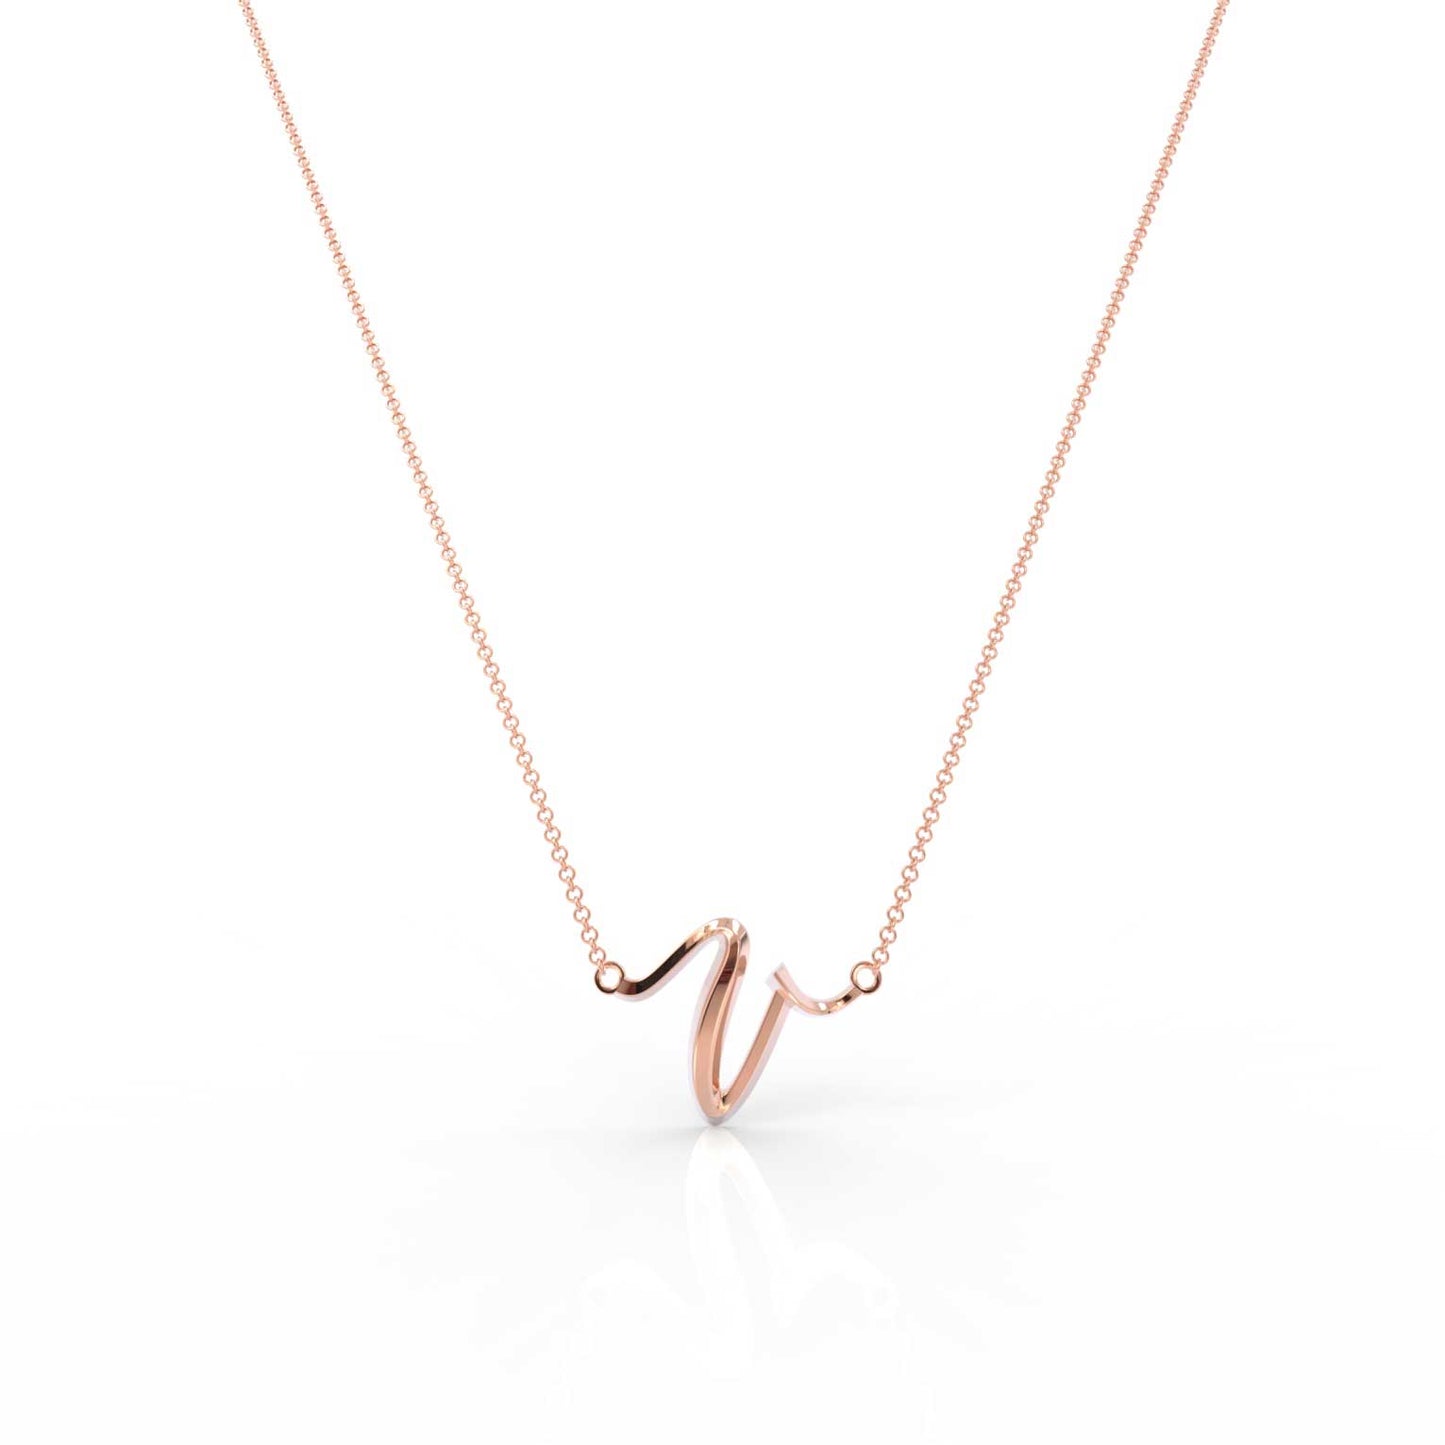 The Love Collect - "V" Necklace